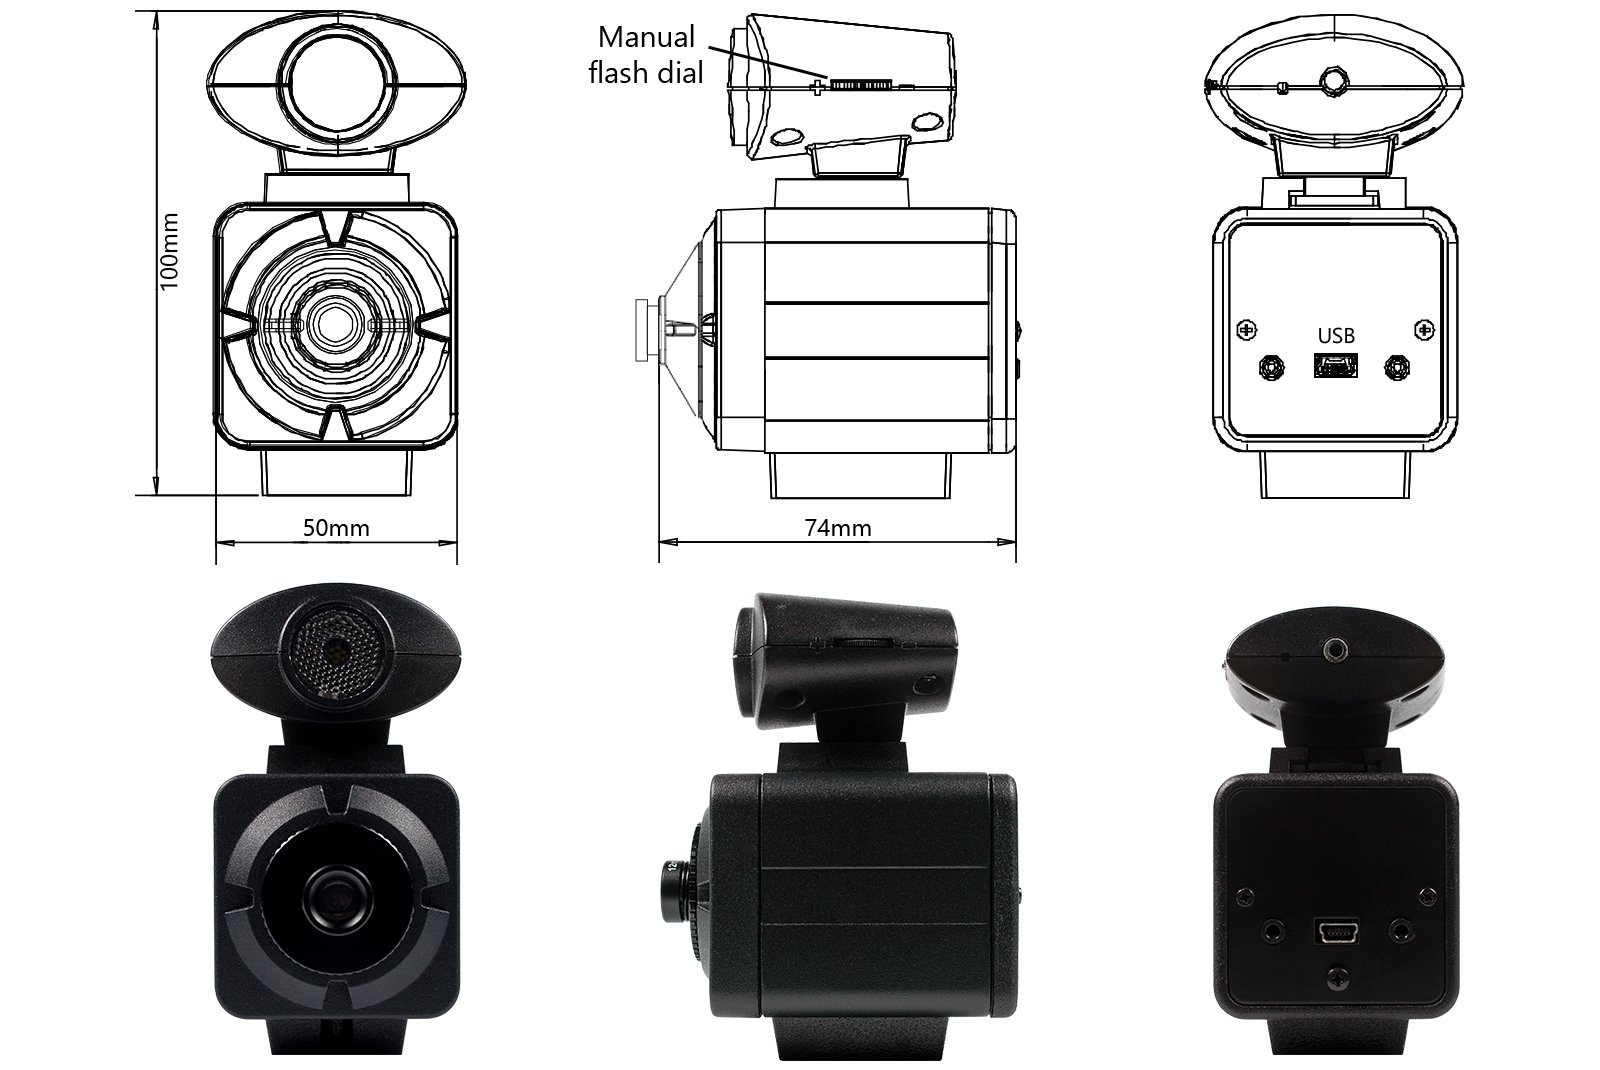 Videology Photo ID cameras with flash